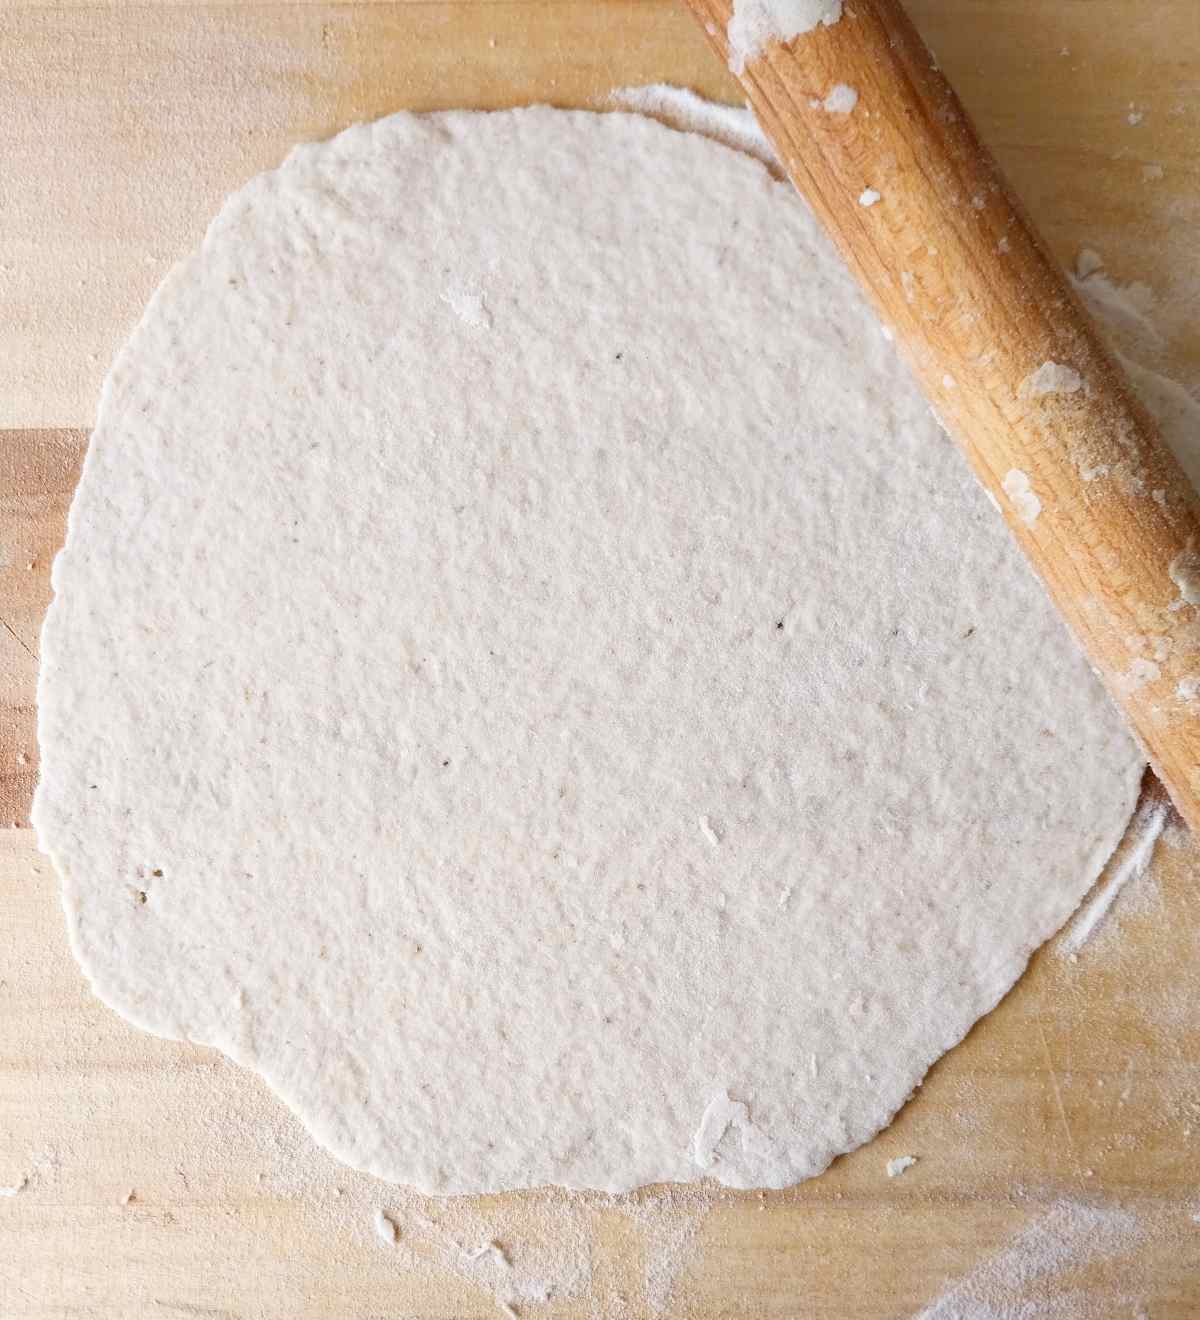 Rolled out lavash with the rolling pin on the side.